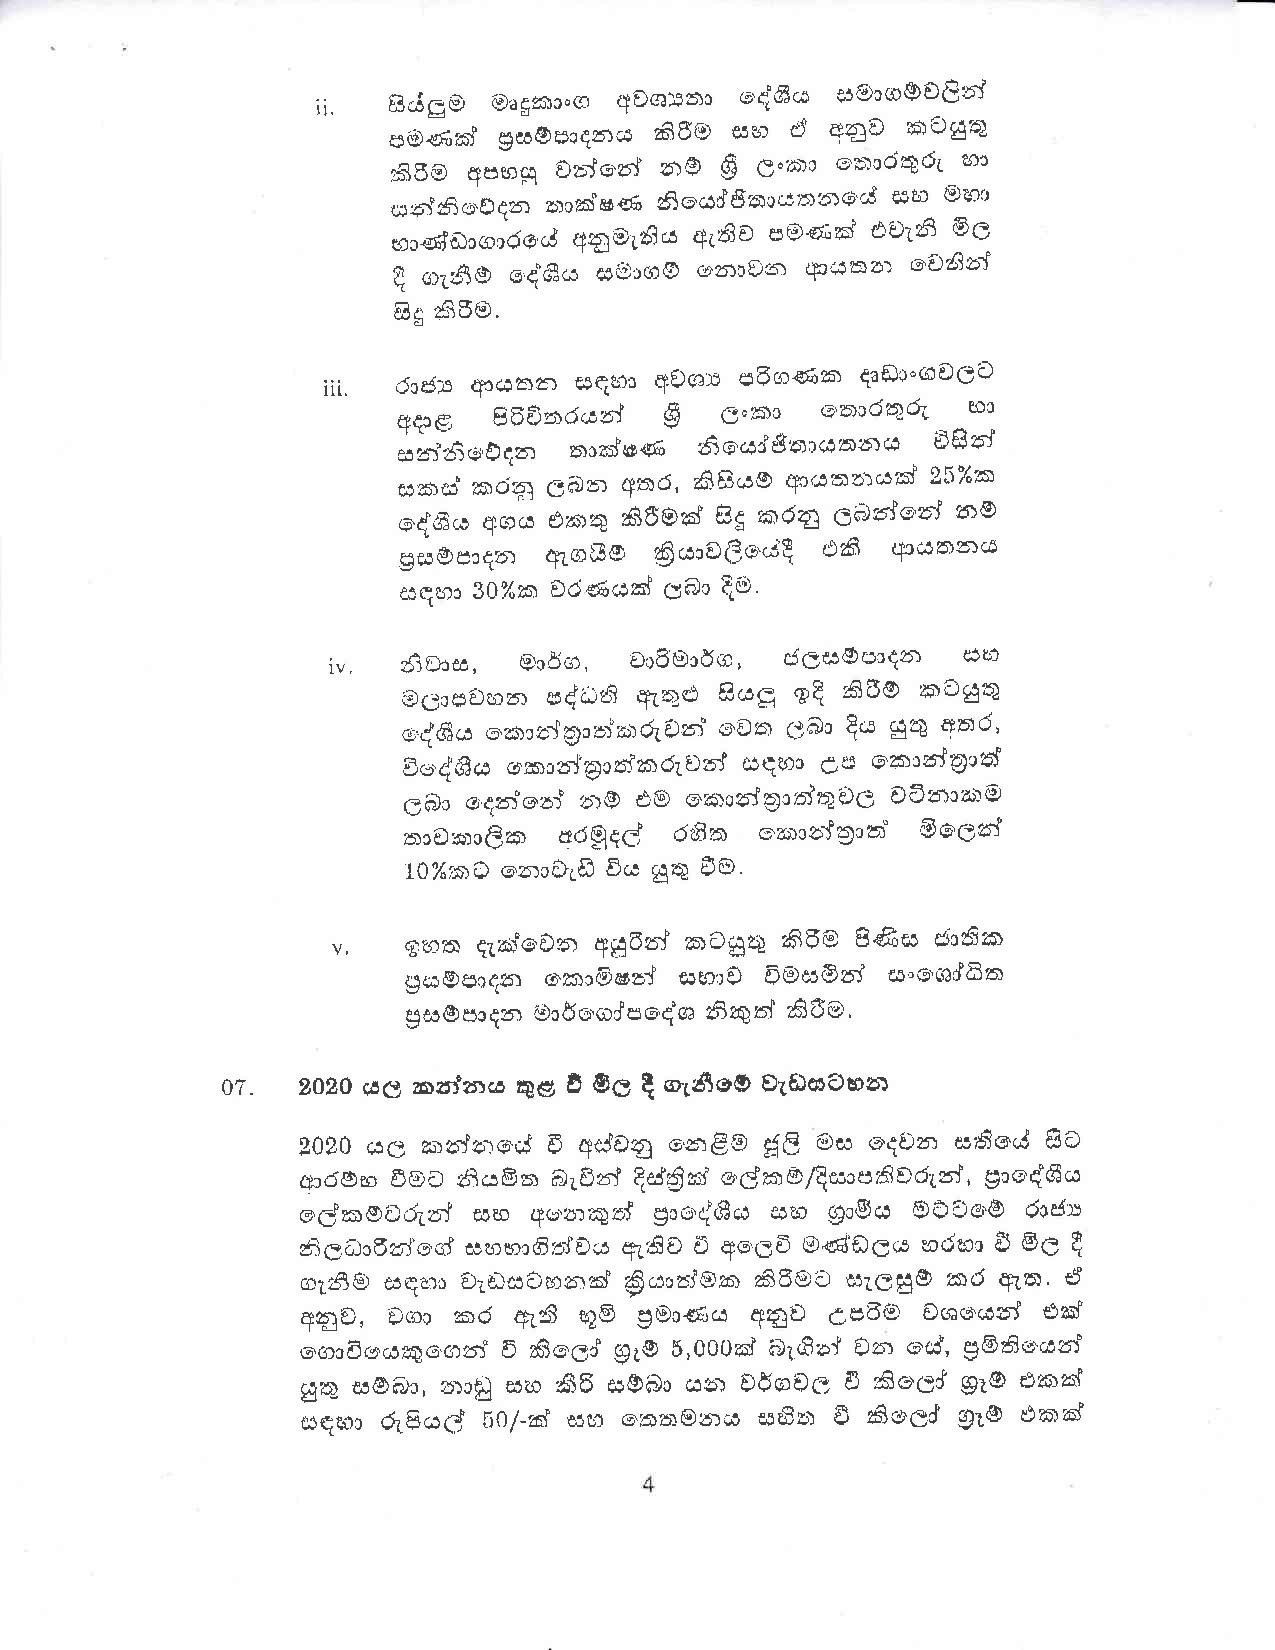 Cabinet Decision on 15.07.2020 page 004